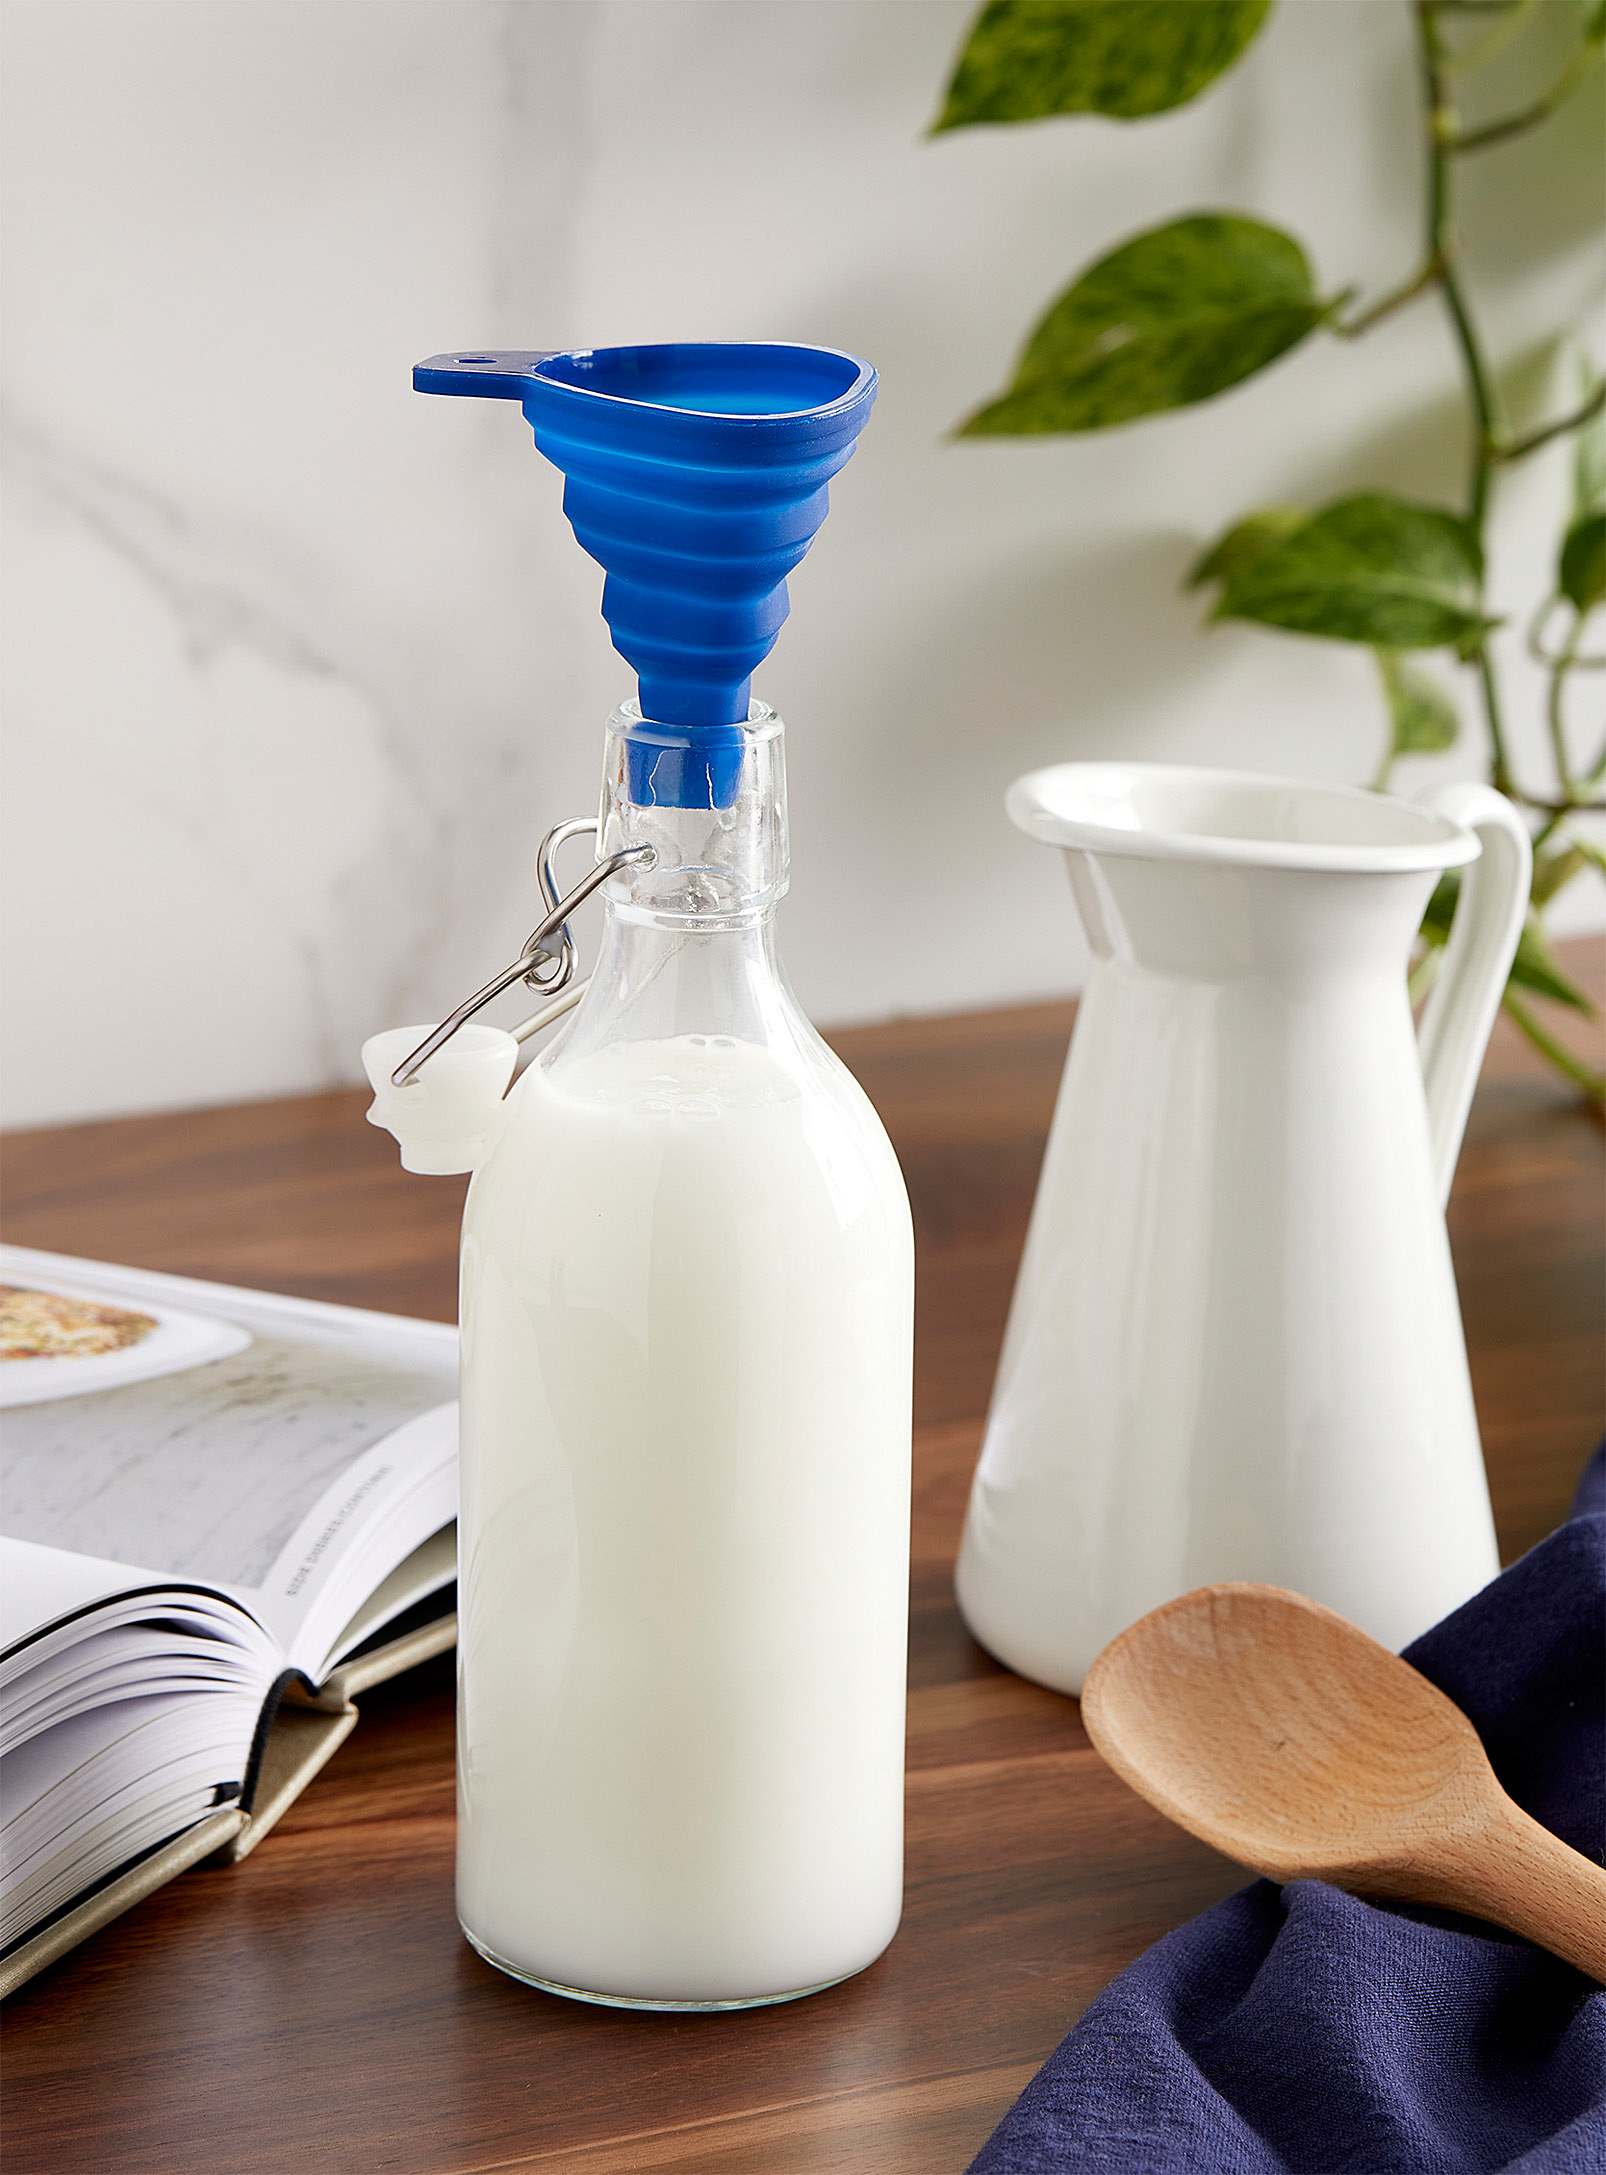 A small silicone funnel balancing on the lip of a glass carafe filled with milk